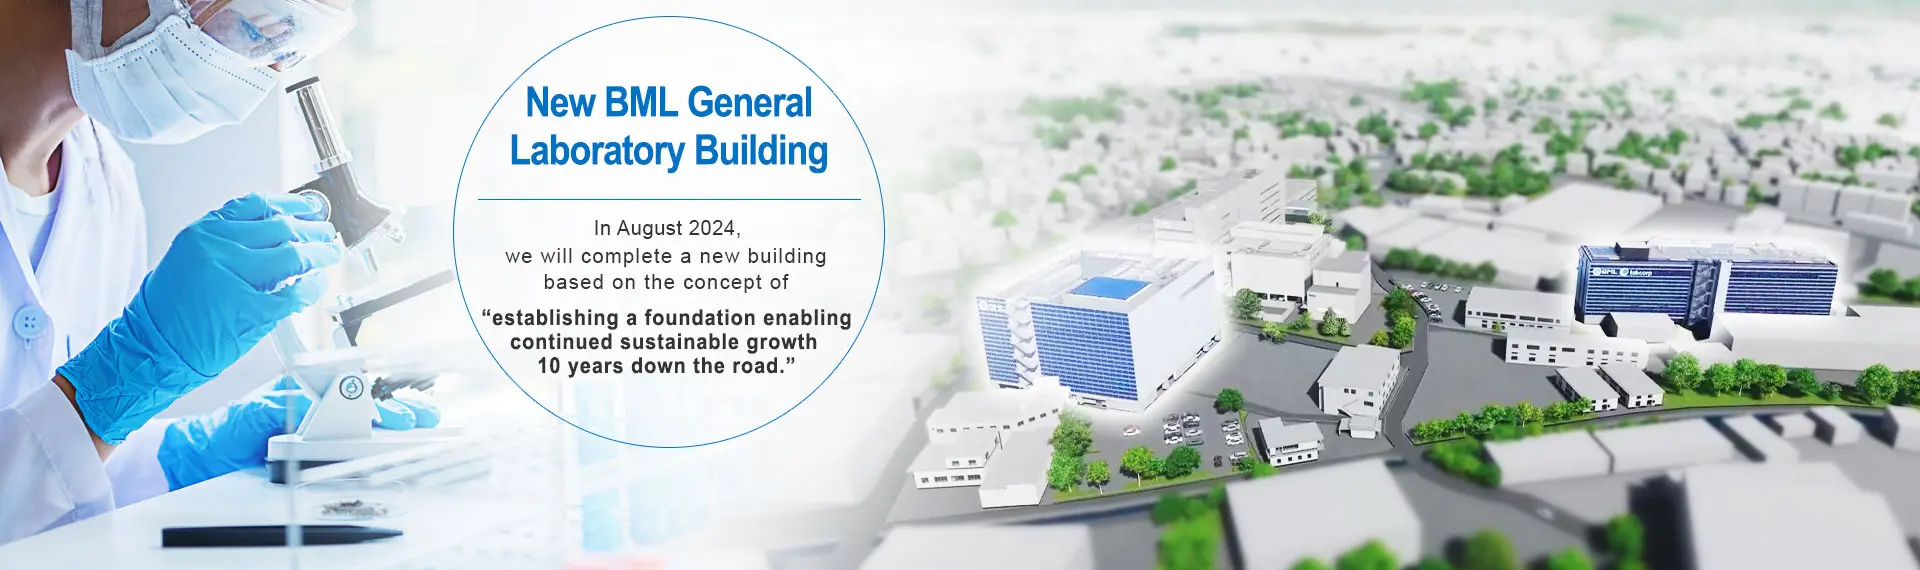 New BML General Laboratory Building.In August 2024, we will complete a new building based on the concept of “establishing a foundation enabling continued sustainable growth 10 years down the road.”